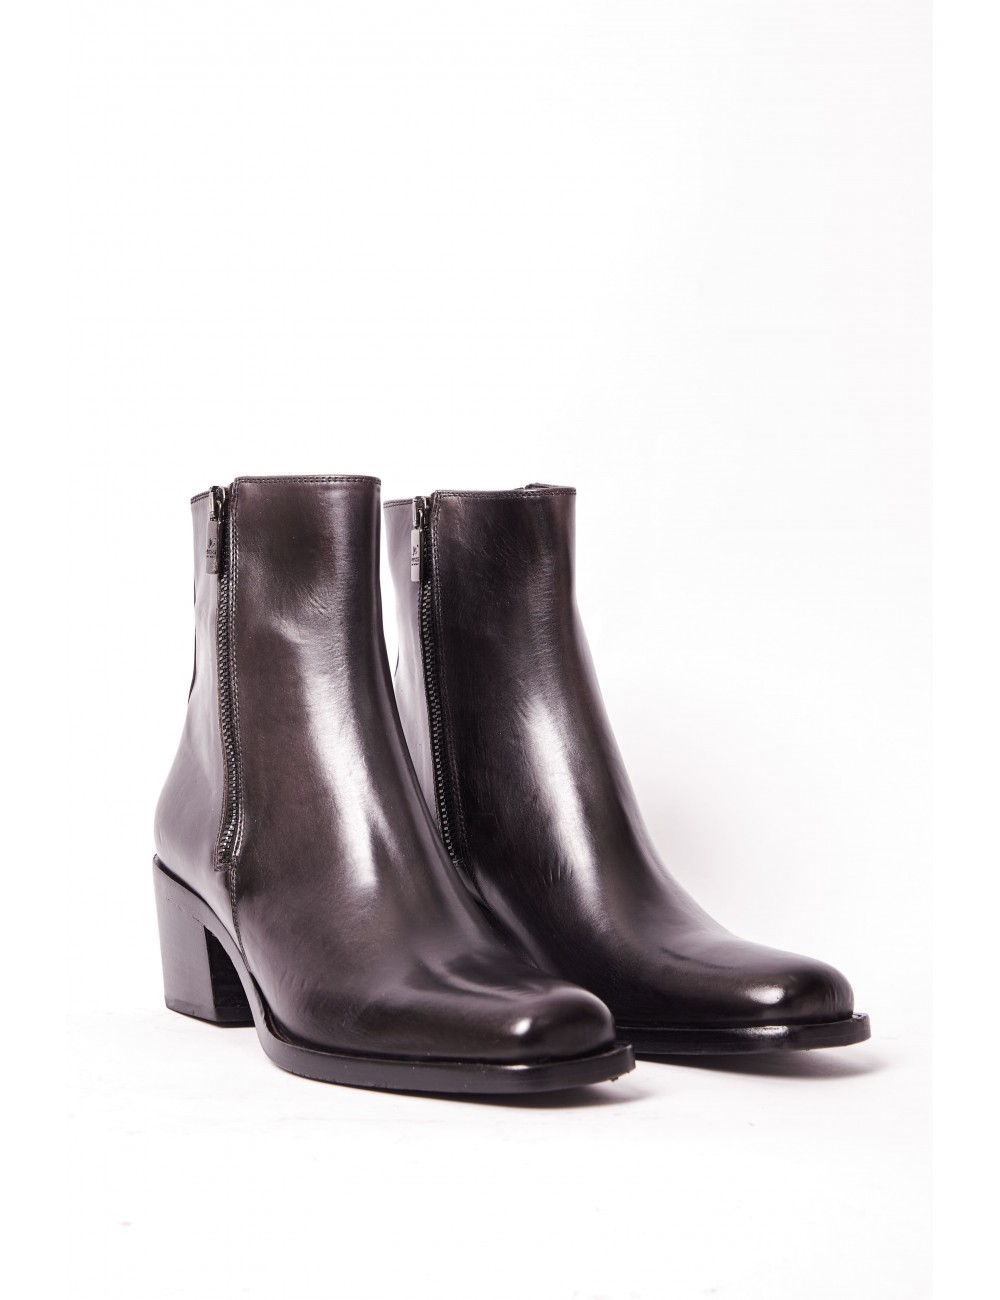 Black calf leather boot for...